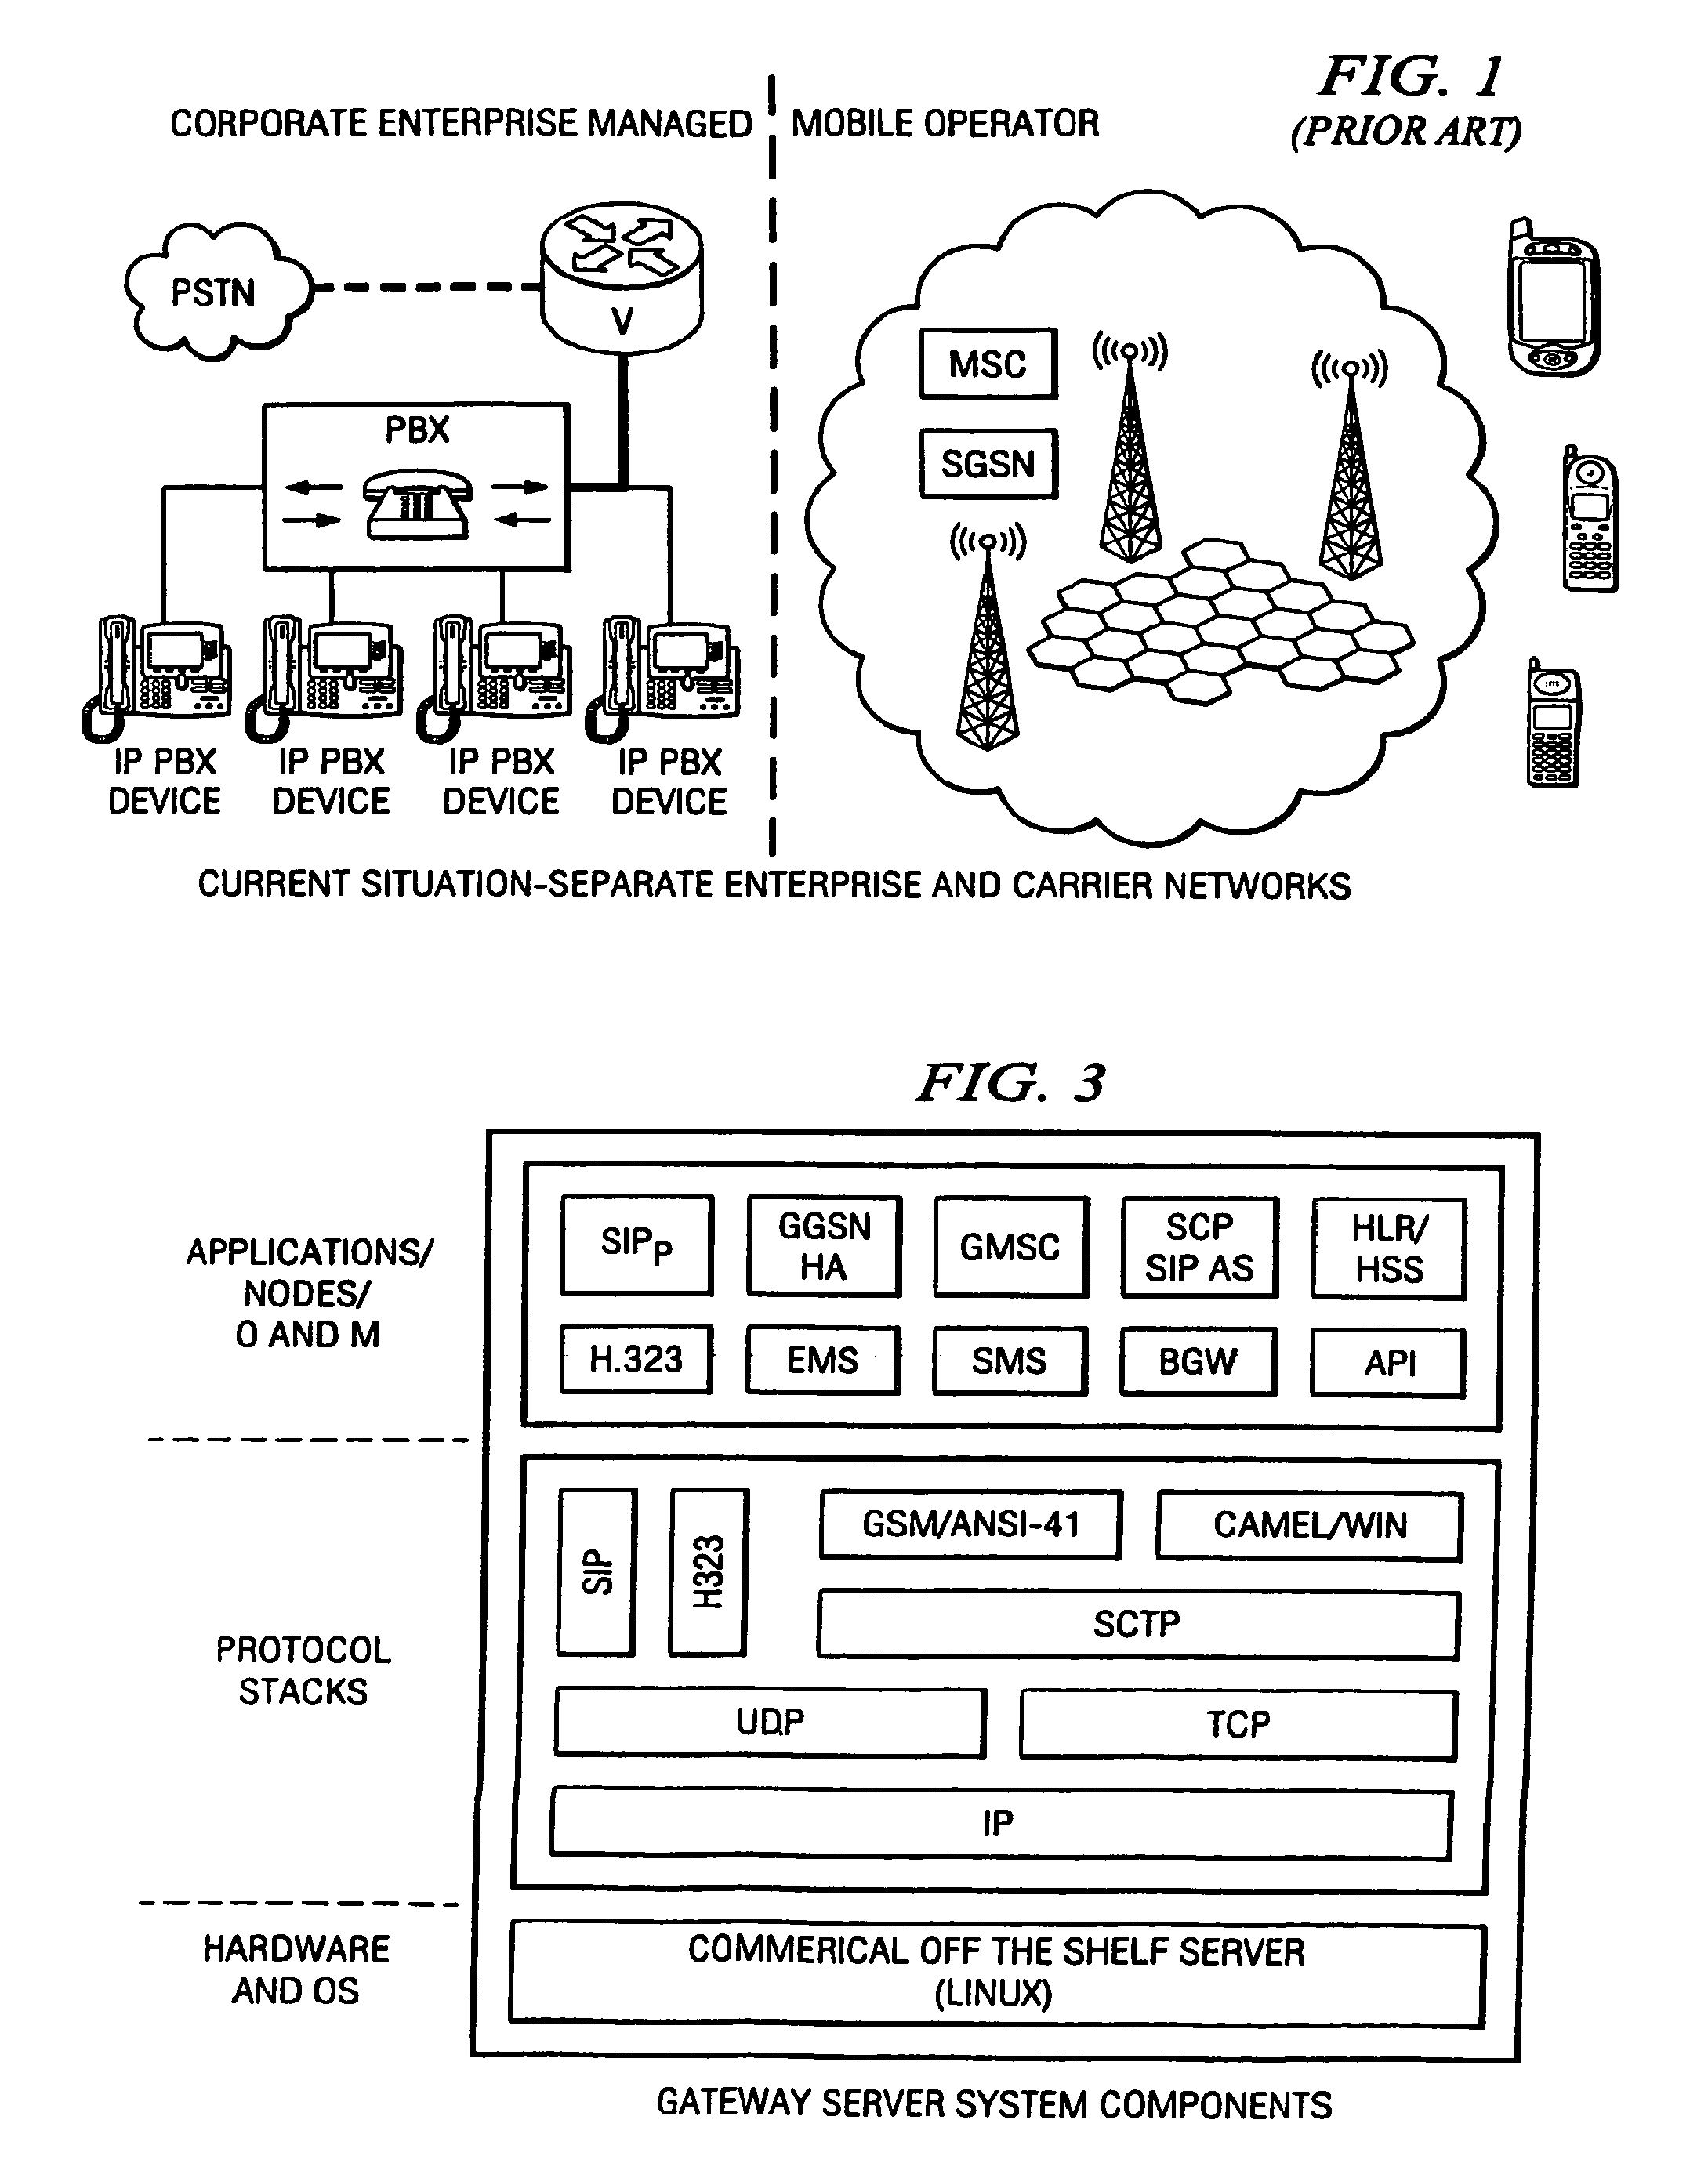 System and method for enabling VPN-less session setup for connecting mobile data devices to an enterprise data network